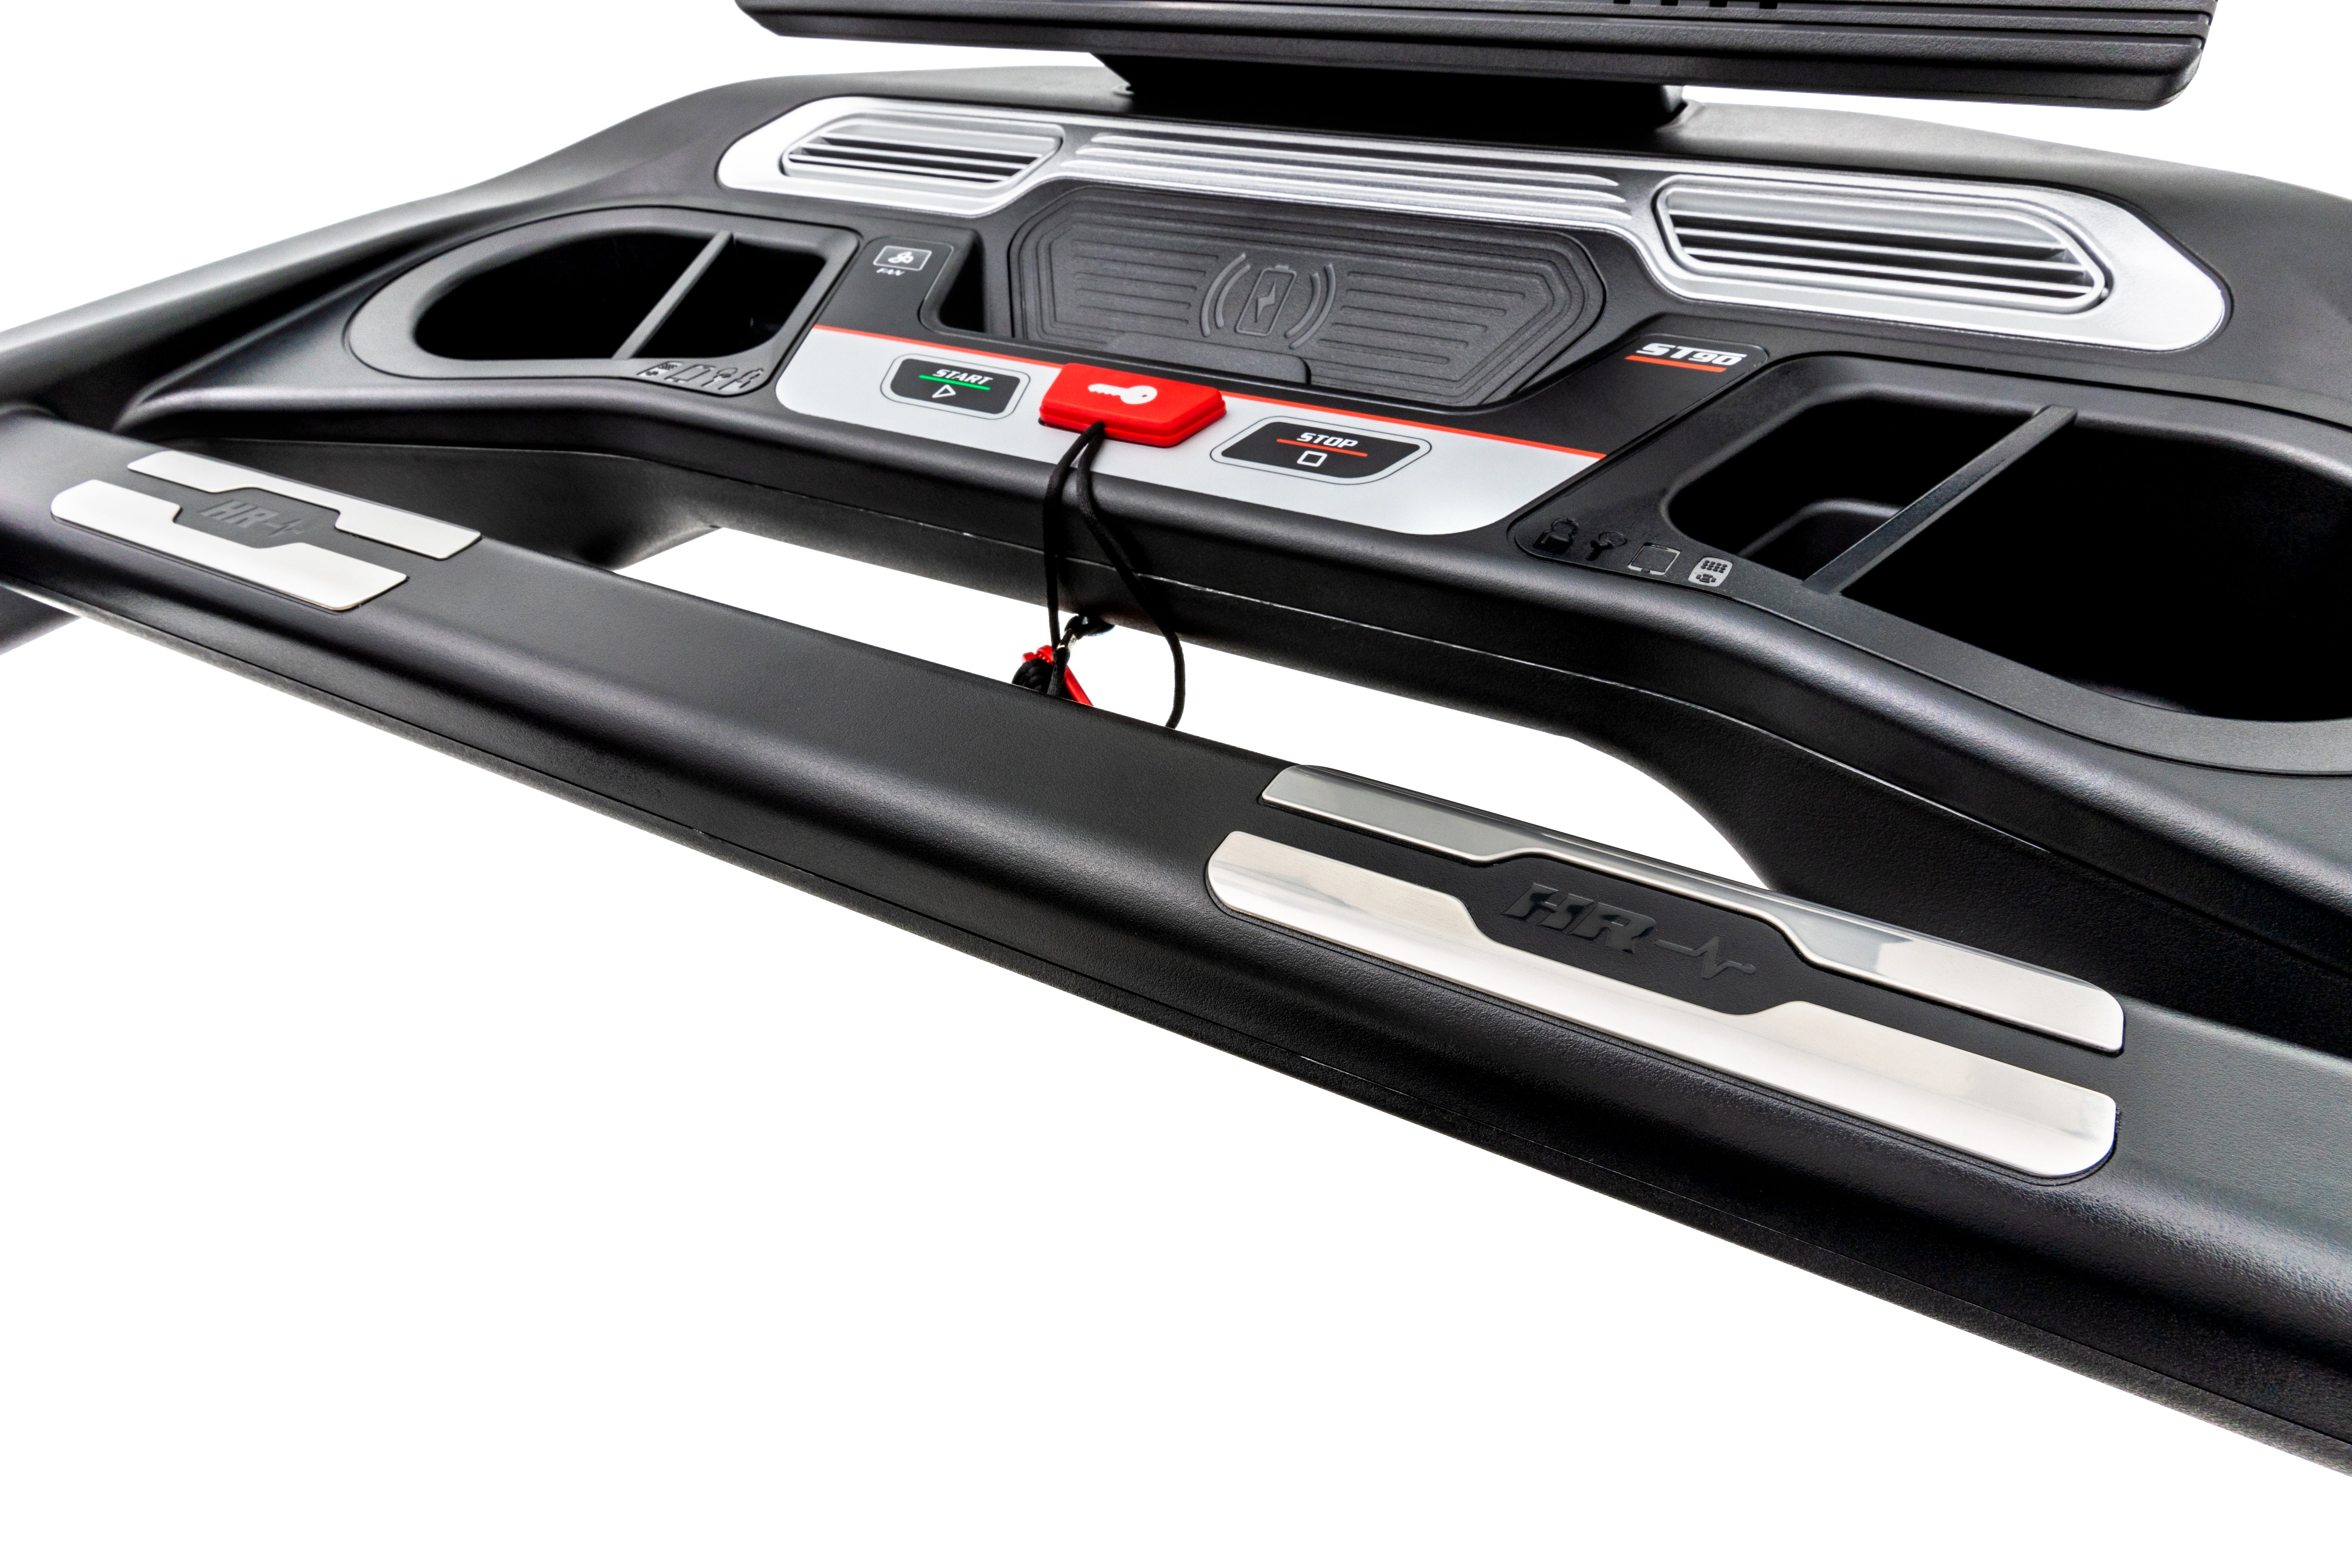 Detailed view of the Sole ST90 treadmill's control panel, displaying the digital screen, various buttons including emergency stop, and built-in cup holders on a sleek black design.